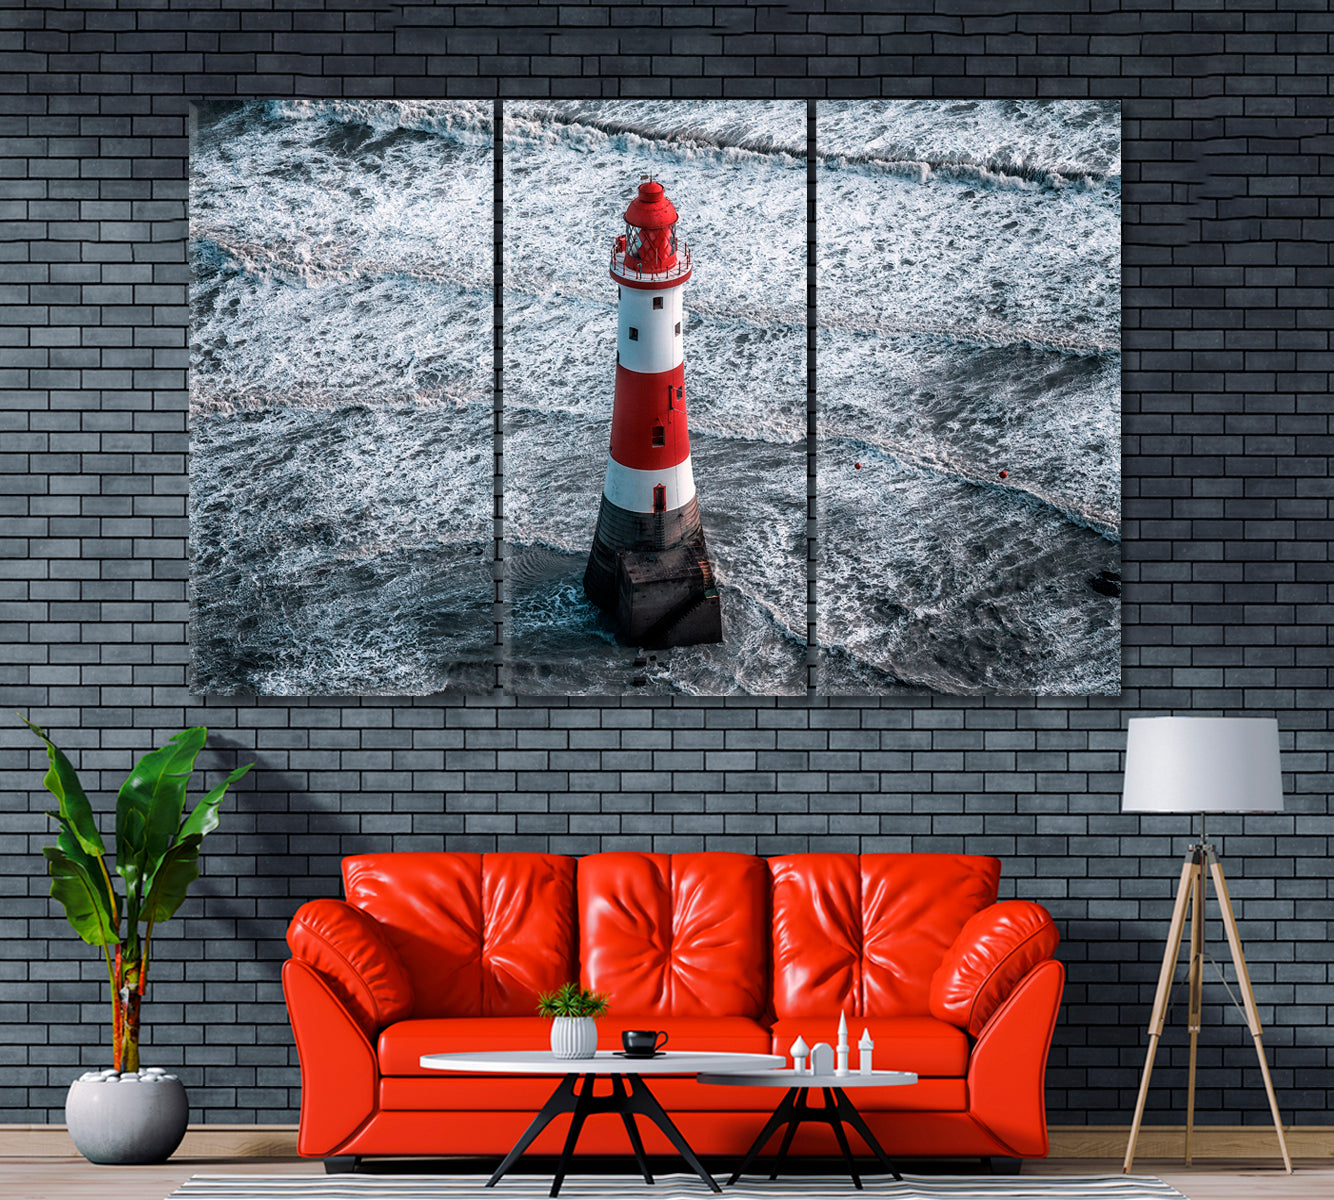 Beachy Head Lighthouse East Sussex England Canvas Print ArtLexy 3 Panels 36"x24" inches 